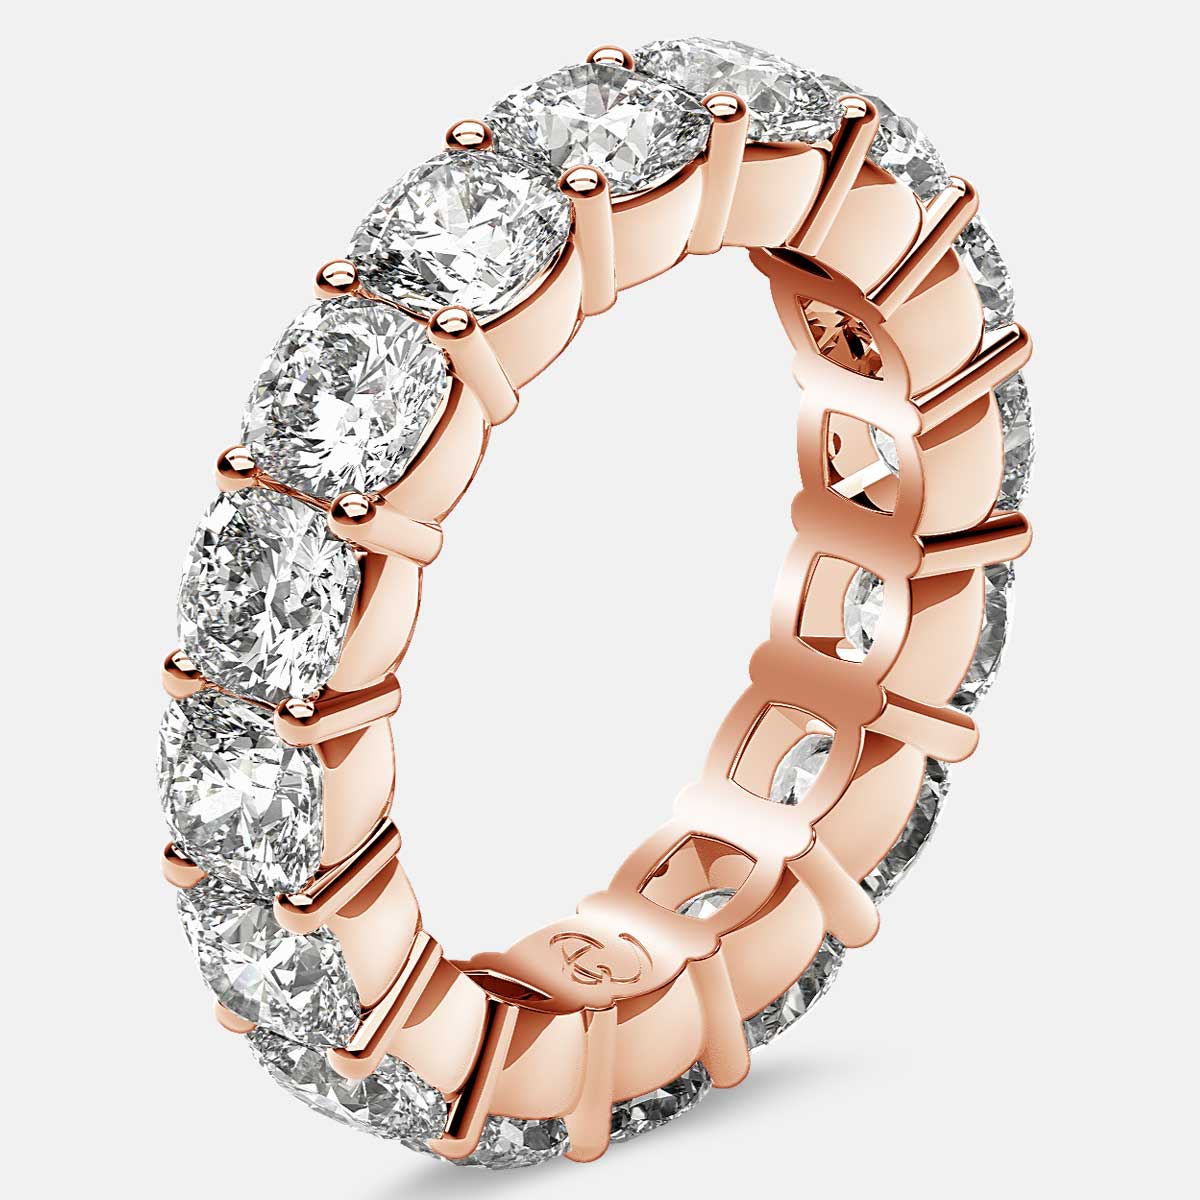 Eternity Ring with Prong Set Cushion Cut Diamonds in 18k Rose Gold